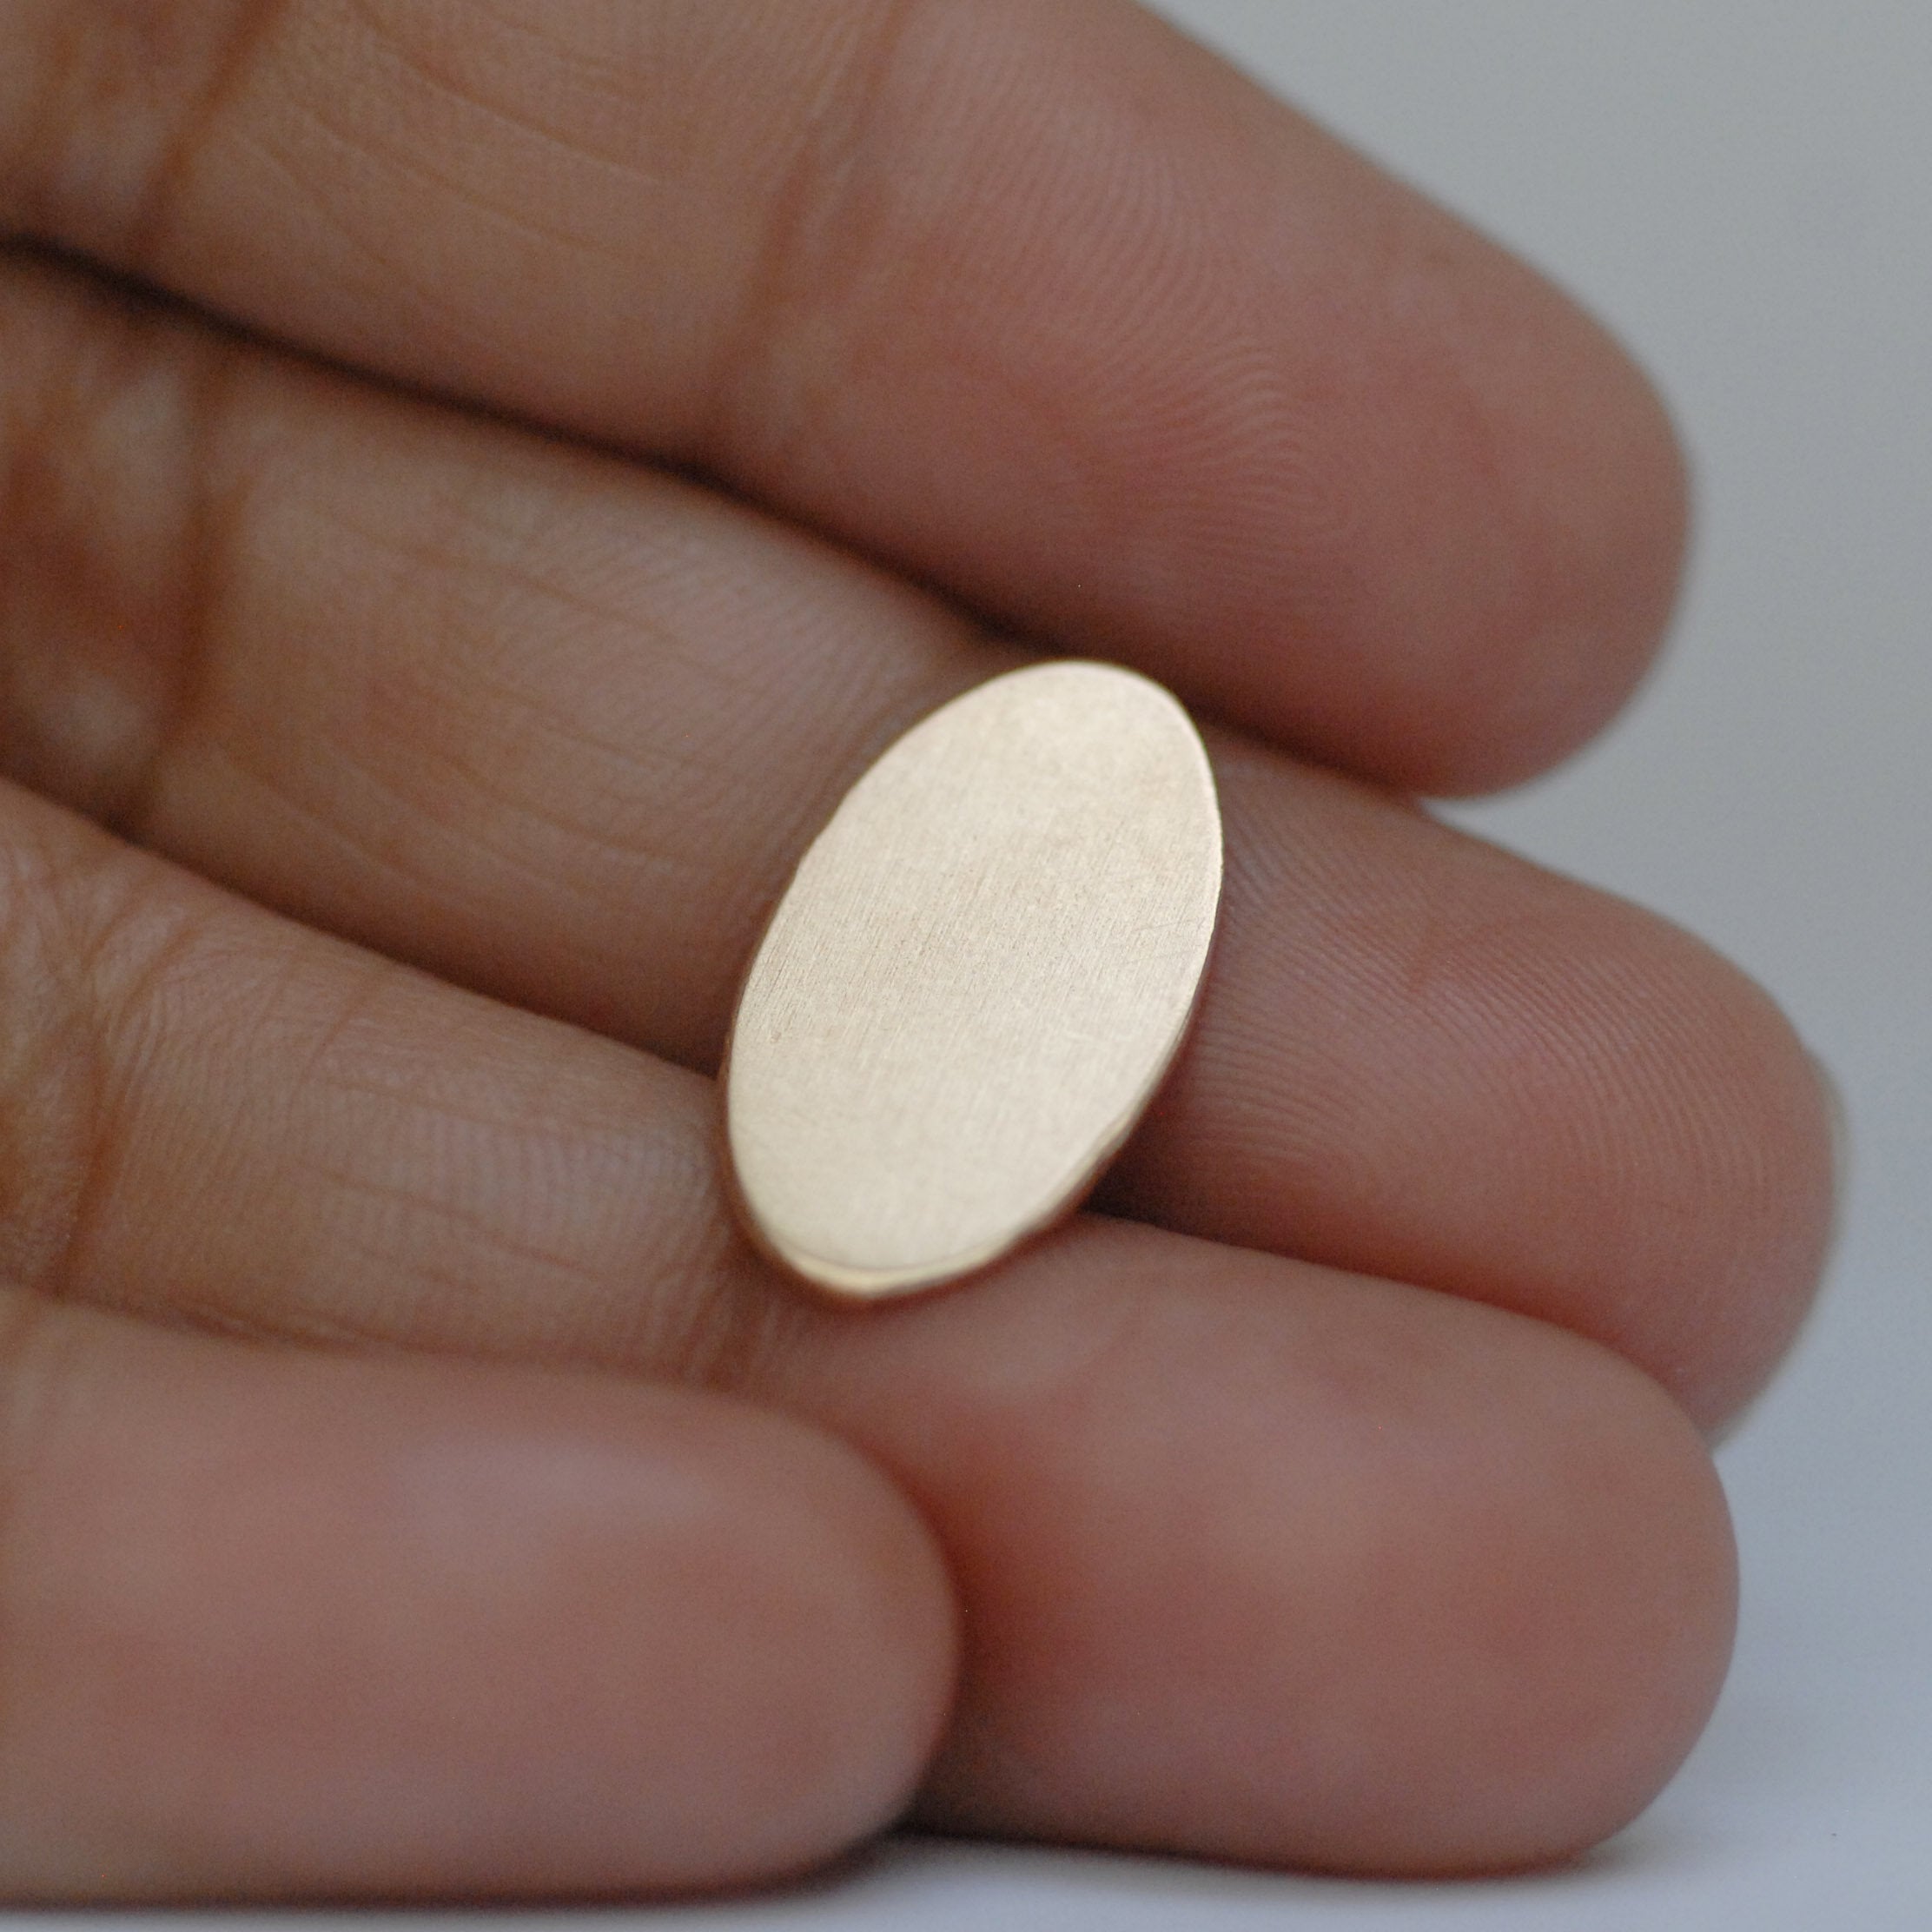 Small oval shapes 10mm x 17mm Metal blanks for making jewelry copper, brass, bronze, nickel silver, 24g 22g 20g